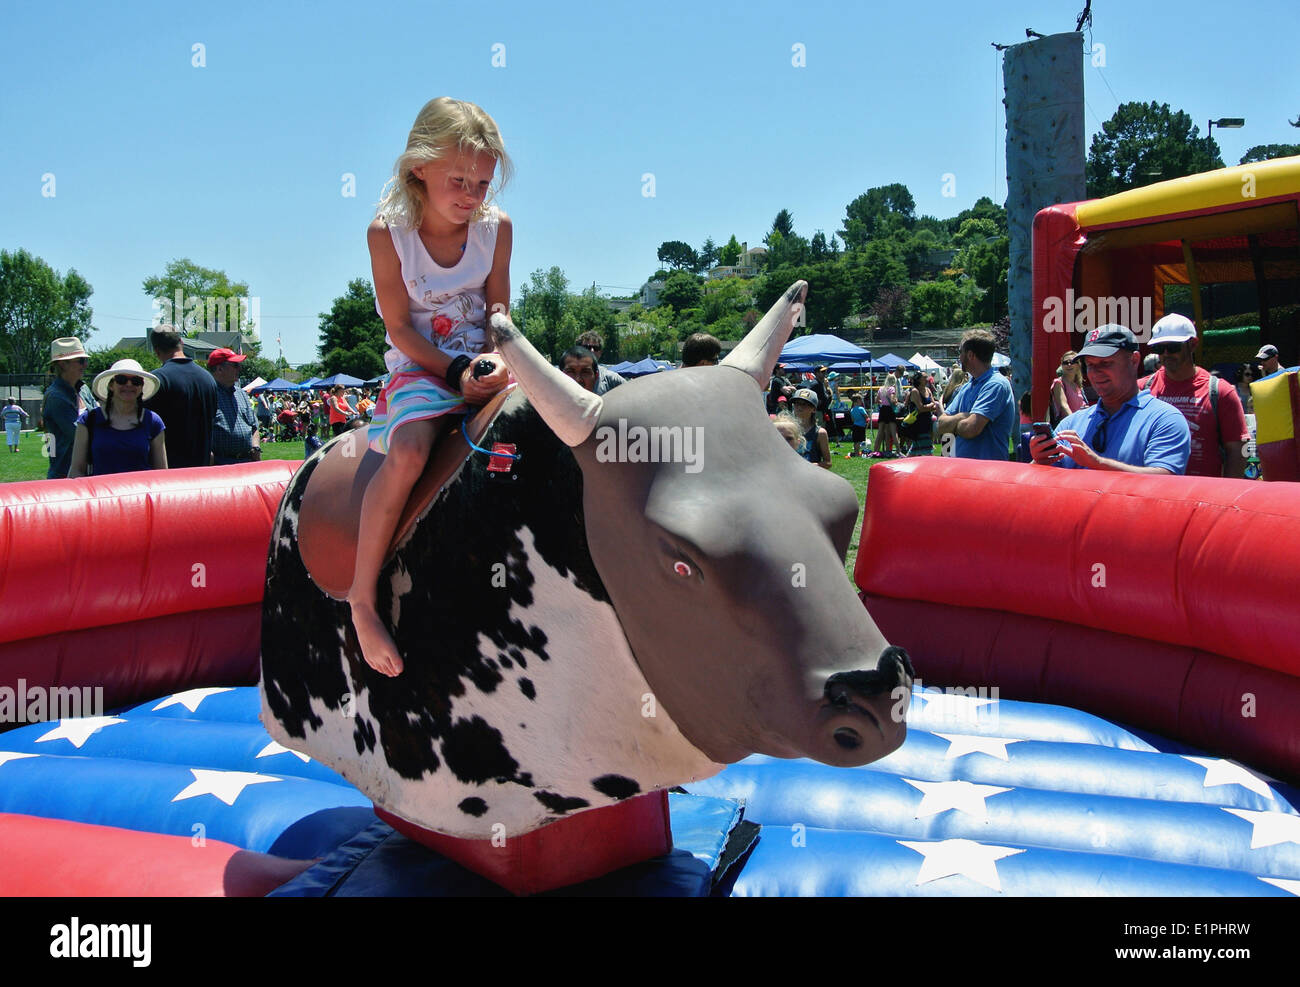 Mill valley, Ca. May 8th,2014. girl rides mechanical bull at strawberry community 65th annual festival in Mill valley, california Stock Photo